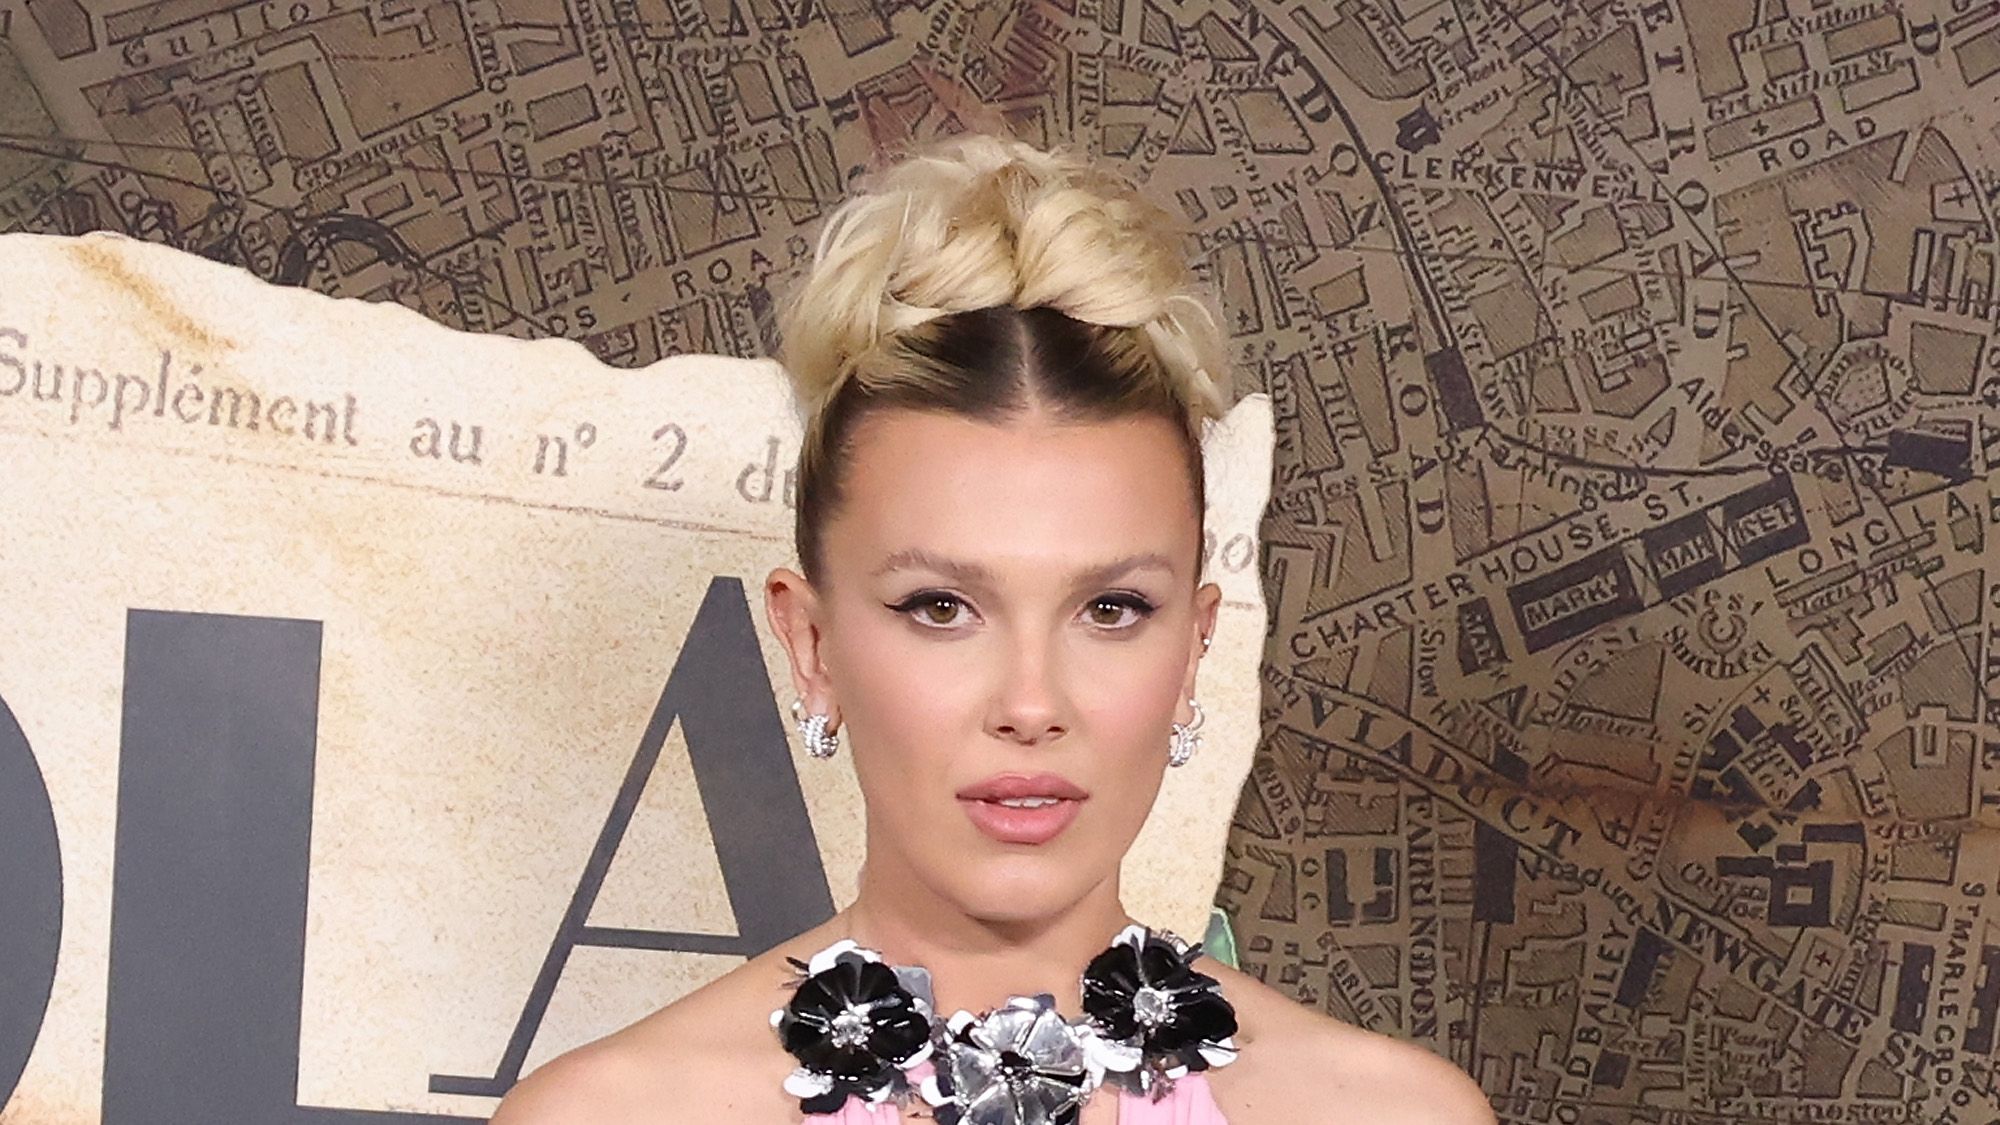 Millie Bobby Brown Traded In Her Long Hair for a Sleek Bob